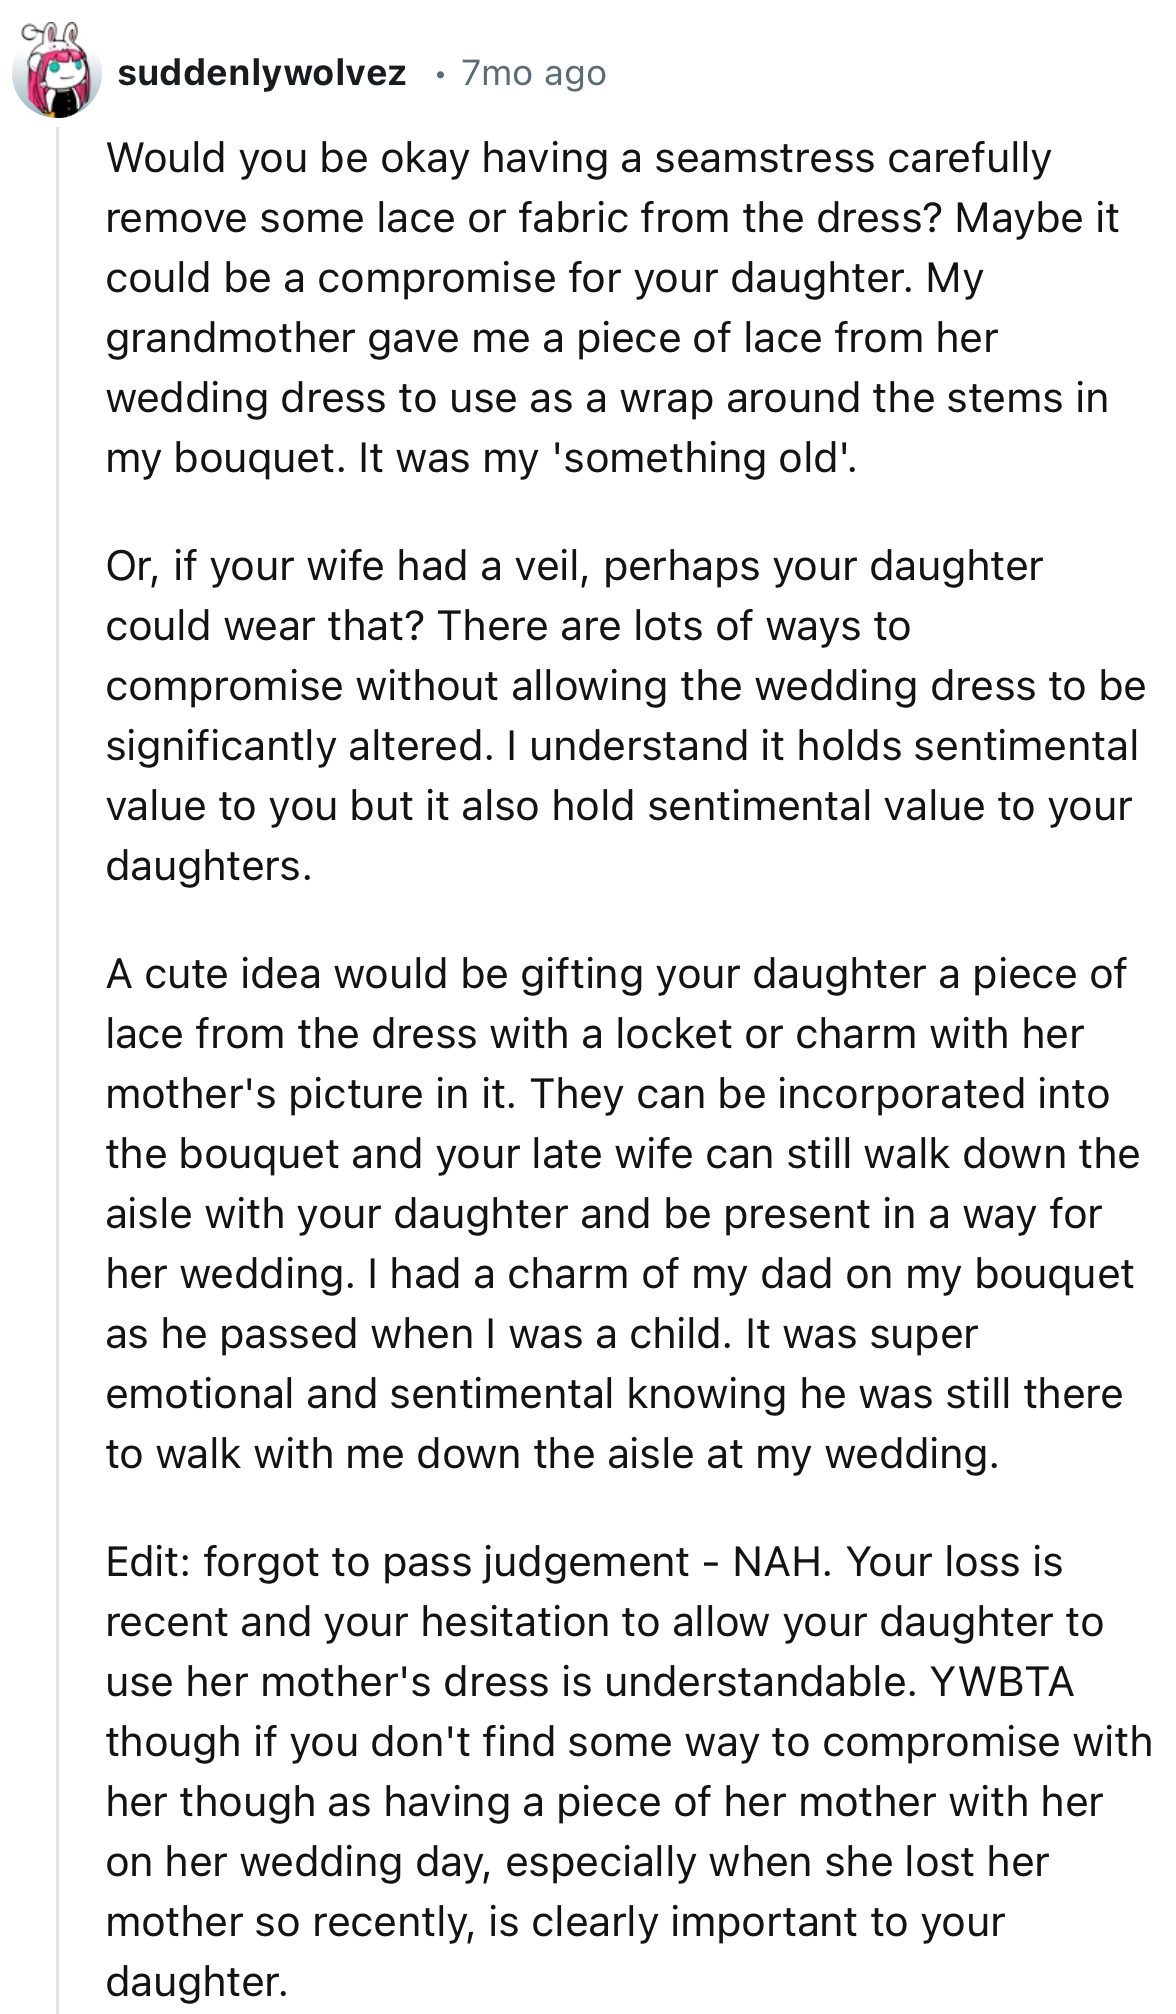 “YWBTA though if you don't find some way to compromise with her though as having a piece of her mother with her on her wedding day, especially when she lost her mother so recently, is clearly important to your daughter.”